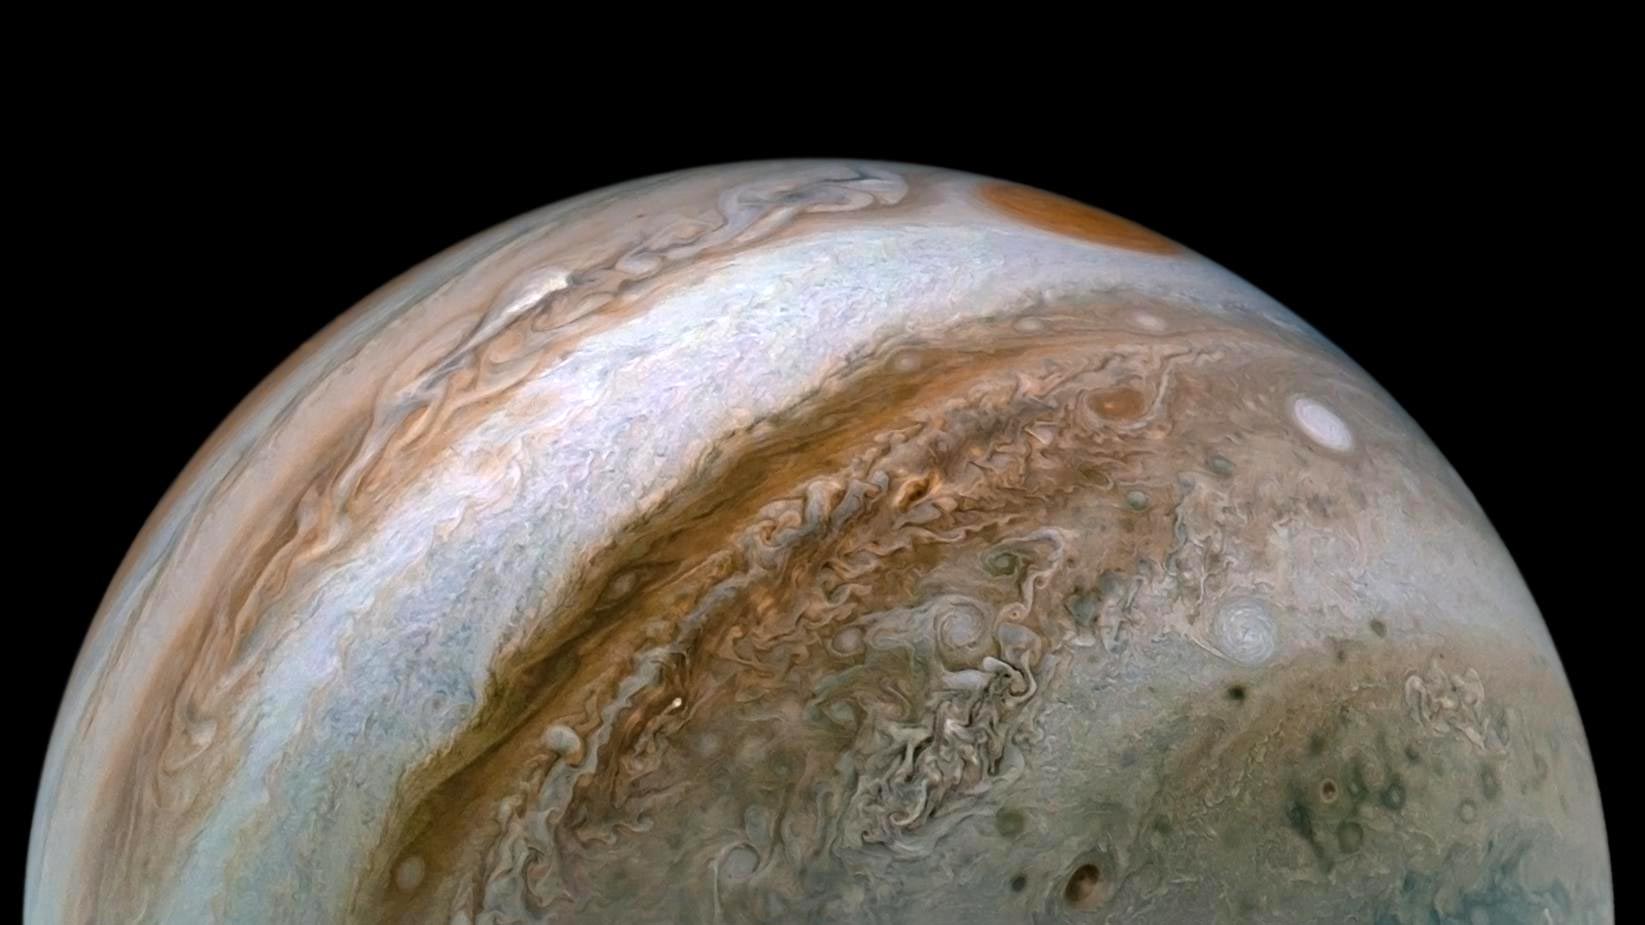 Don’t Miss: Jupiter To Reach Opposition, Closest Approach to Earth in 59 Years!